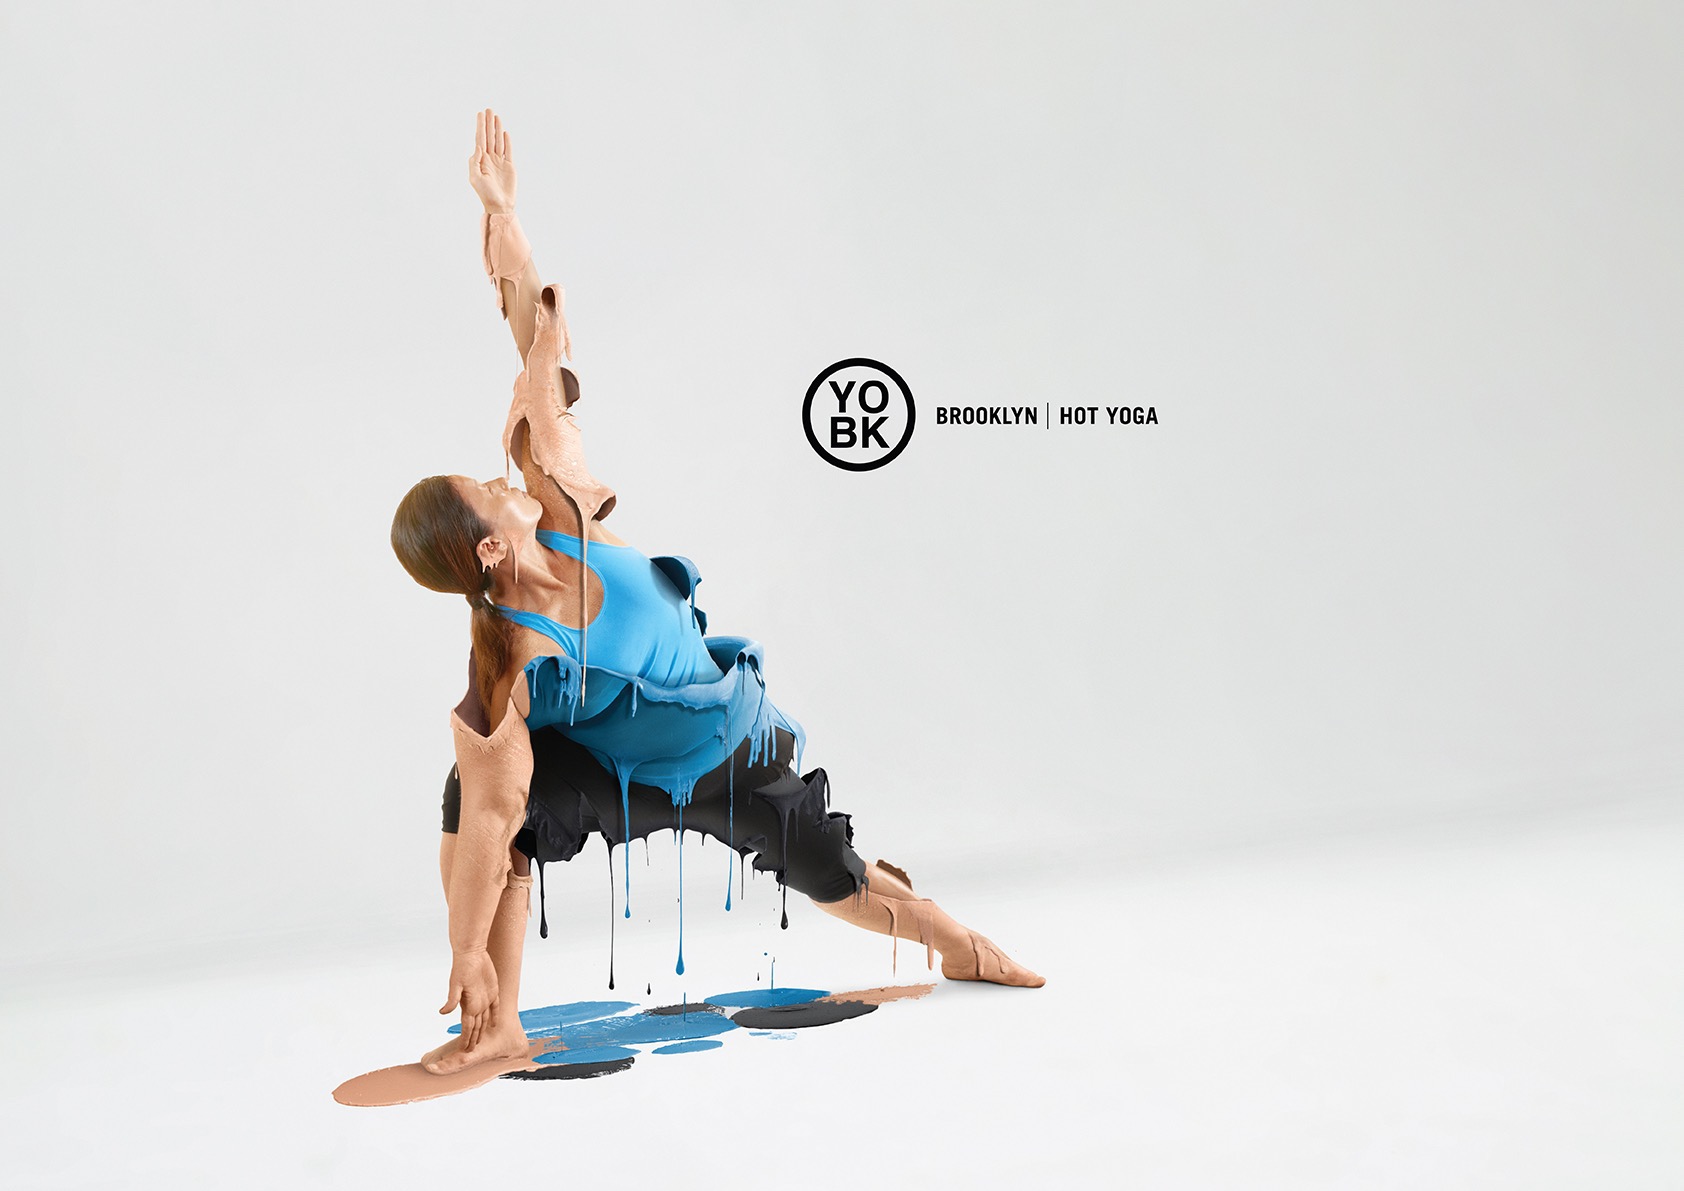 A poster series we put together for YOBK Hot Yoga while freelancing with JW...